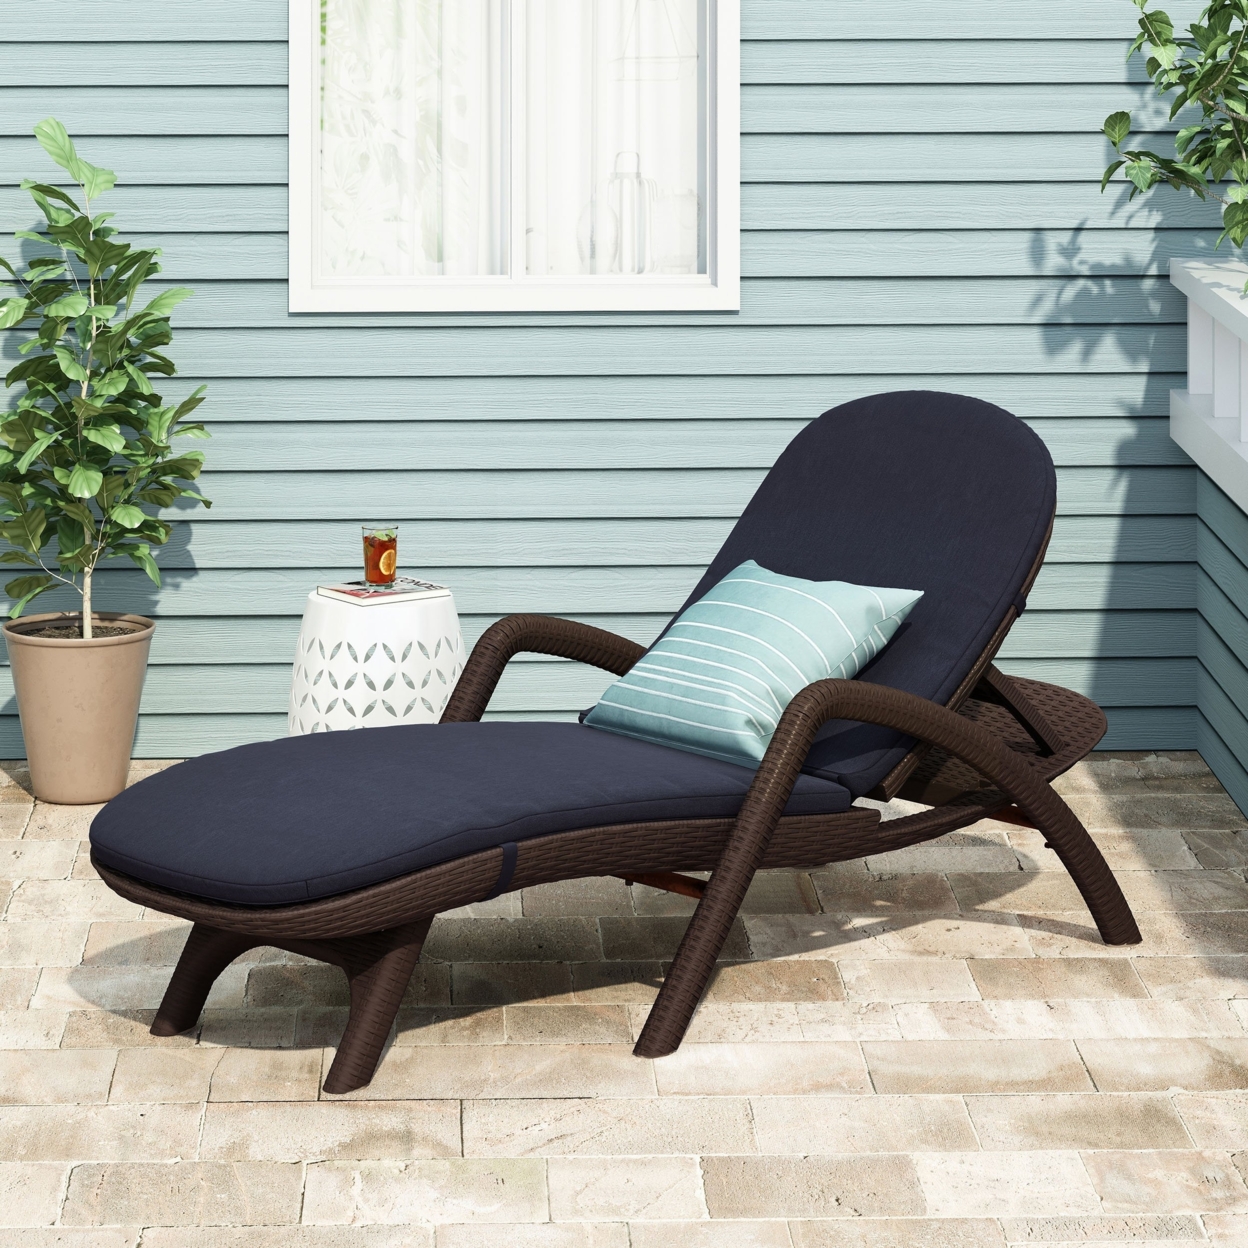 Riley Outdoor Faux Wicker Chaise Lounge With Cushion - Dark Brown/navy Blue